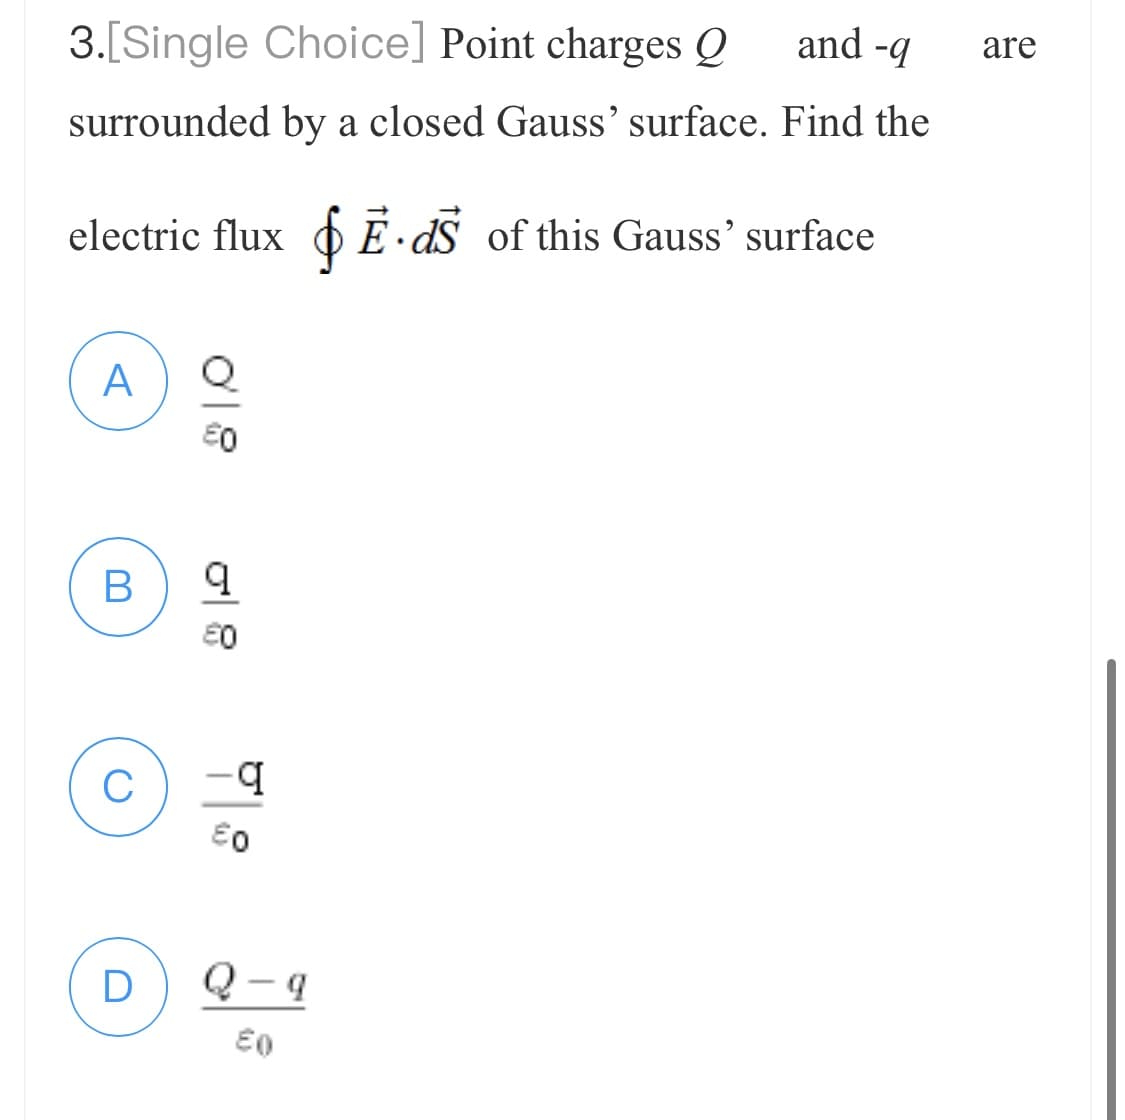 and-q
3.[Single Choice] Point charges Q
surrounded by a closed Gauss' surface. Find the
electric flux Ē.ds of this Gauss' surface
A
B
C
D
O
08
-q
€0
Q-q
€0
are